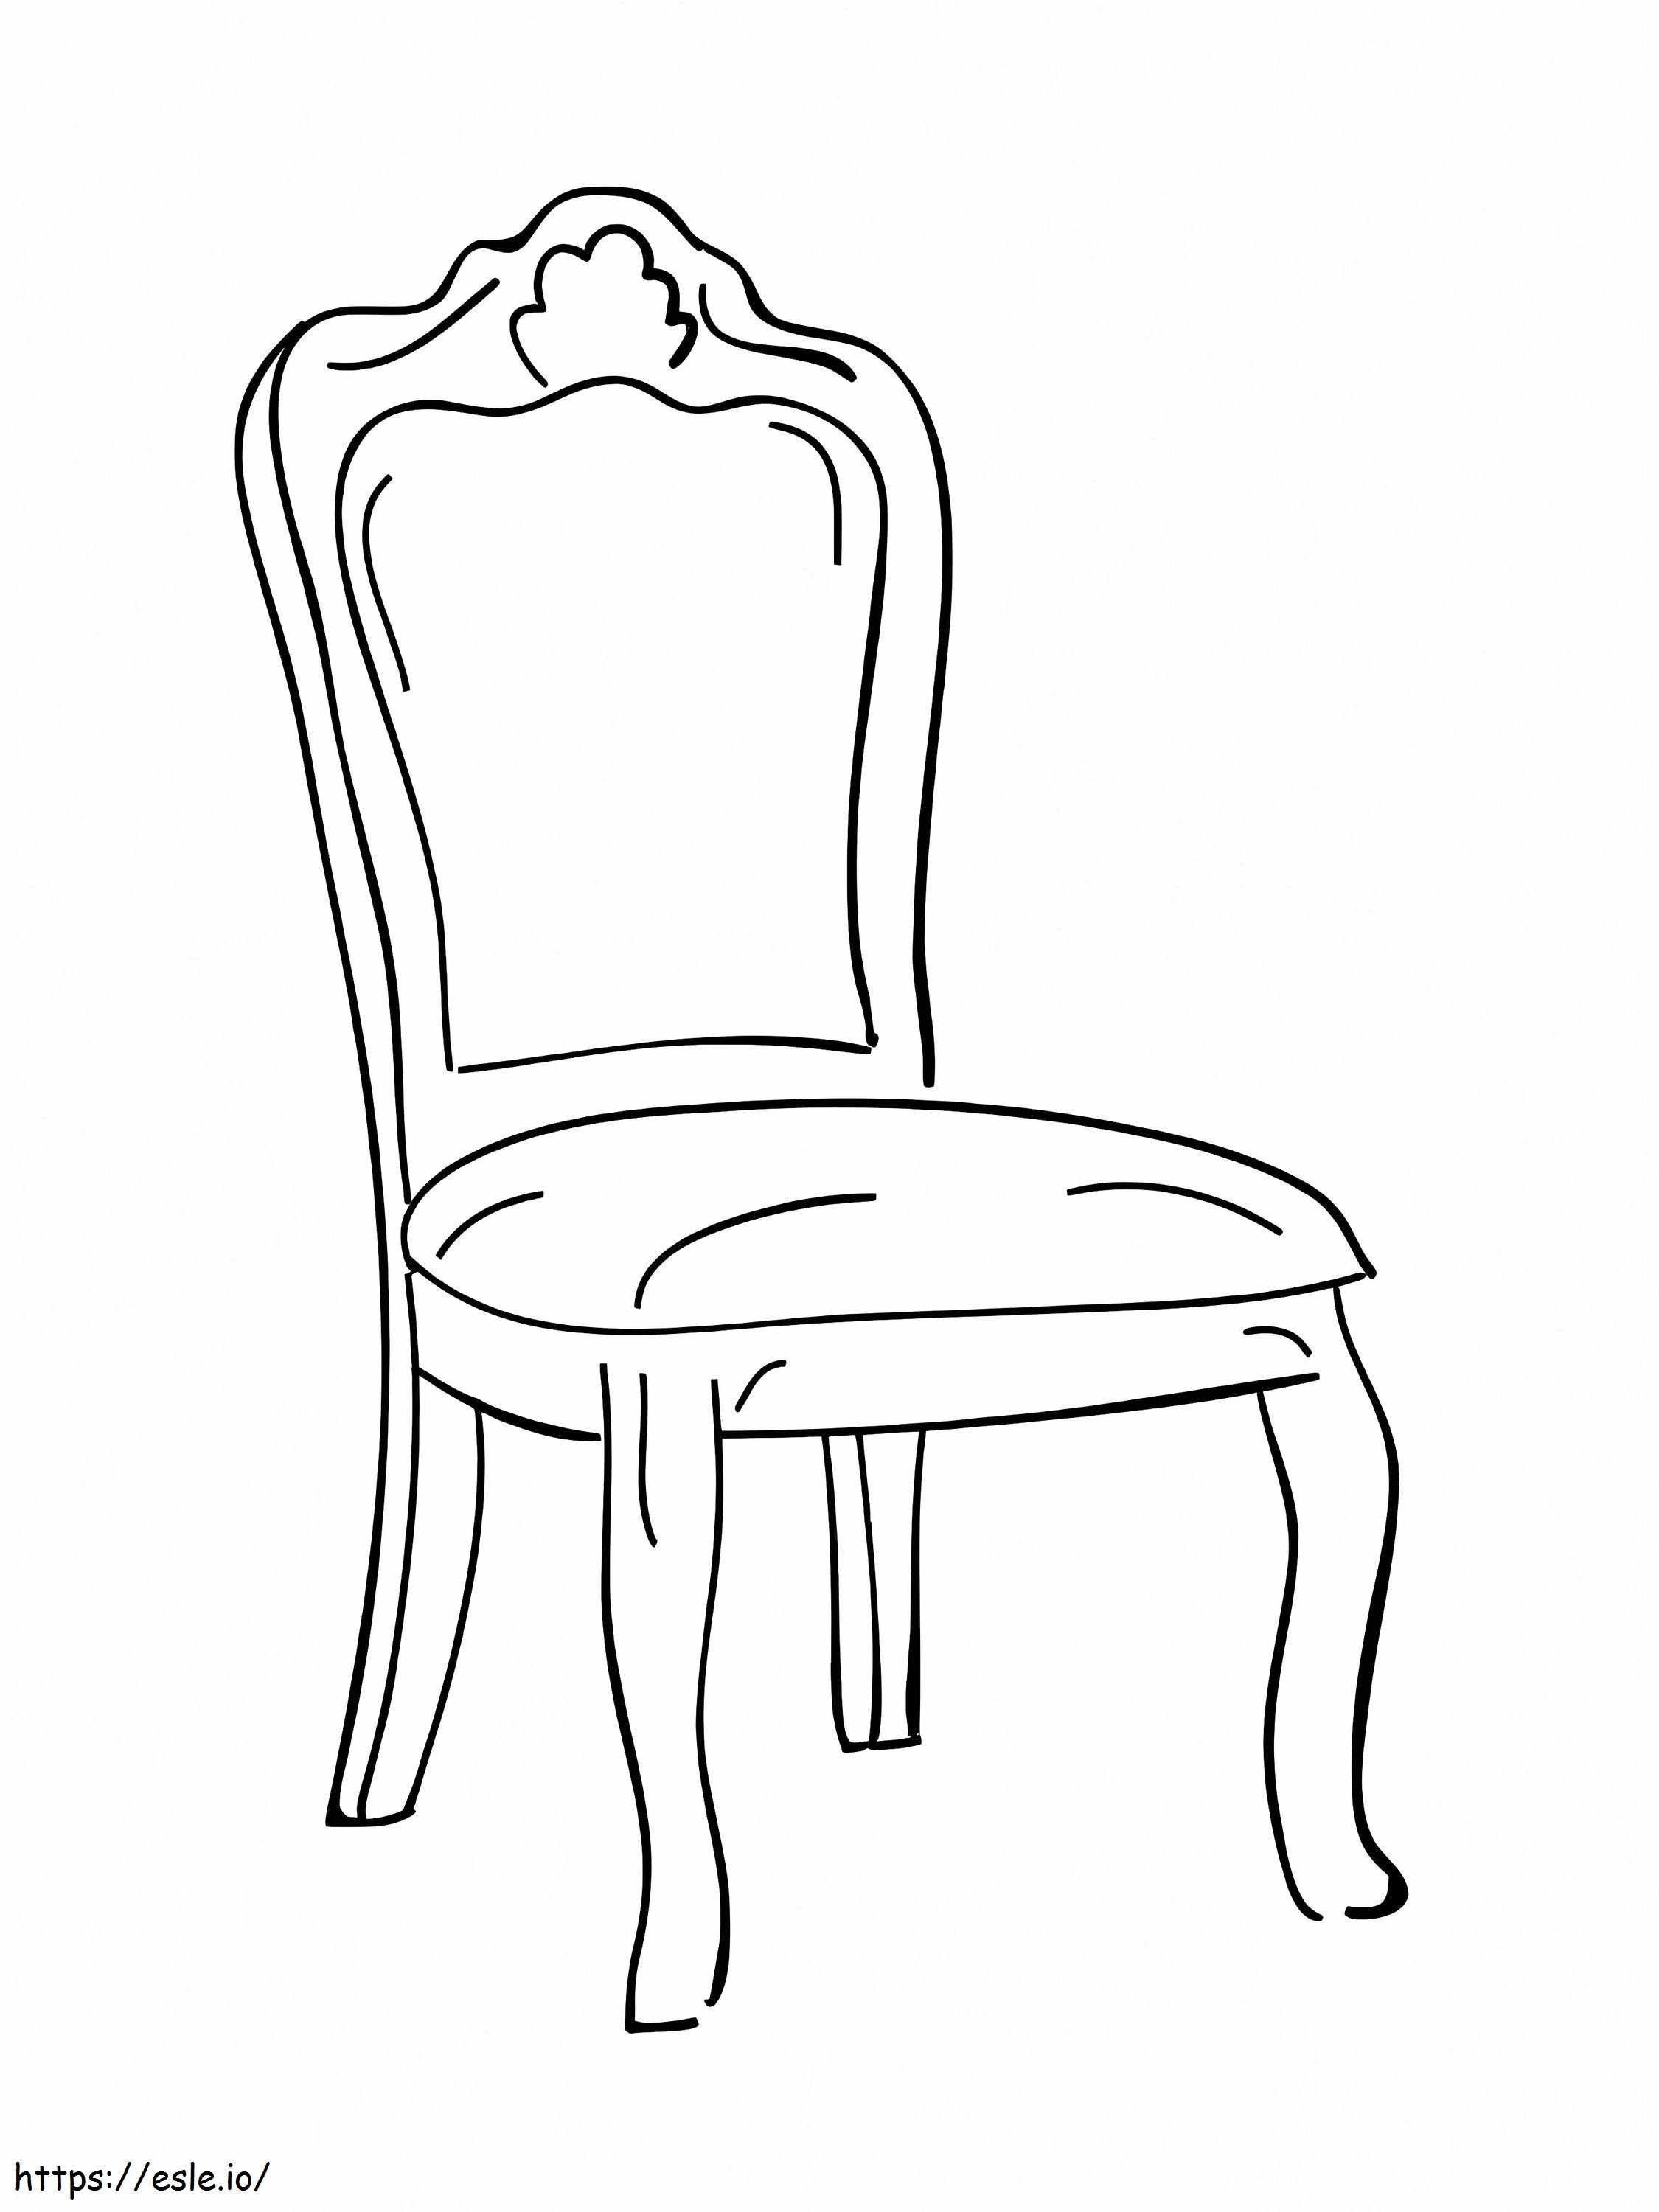 Nice Chair coloring page